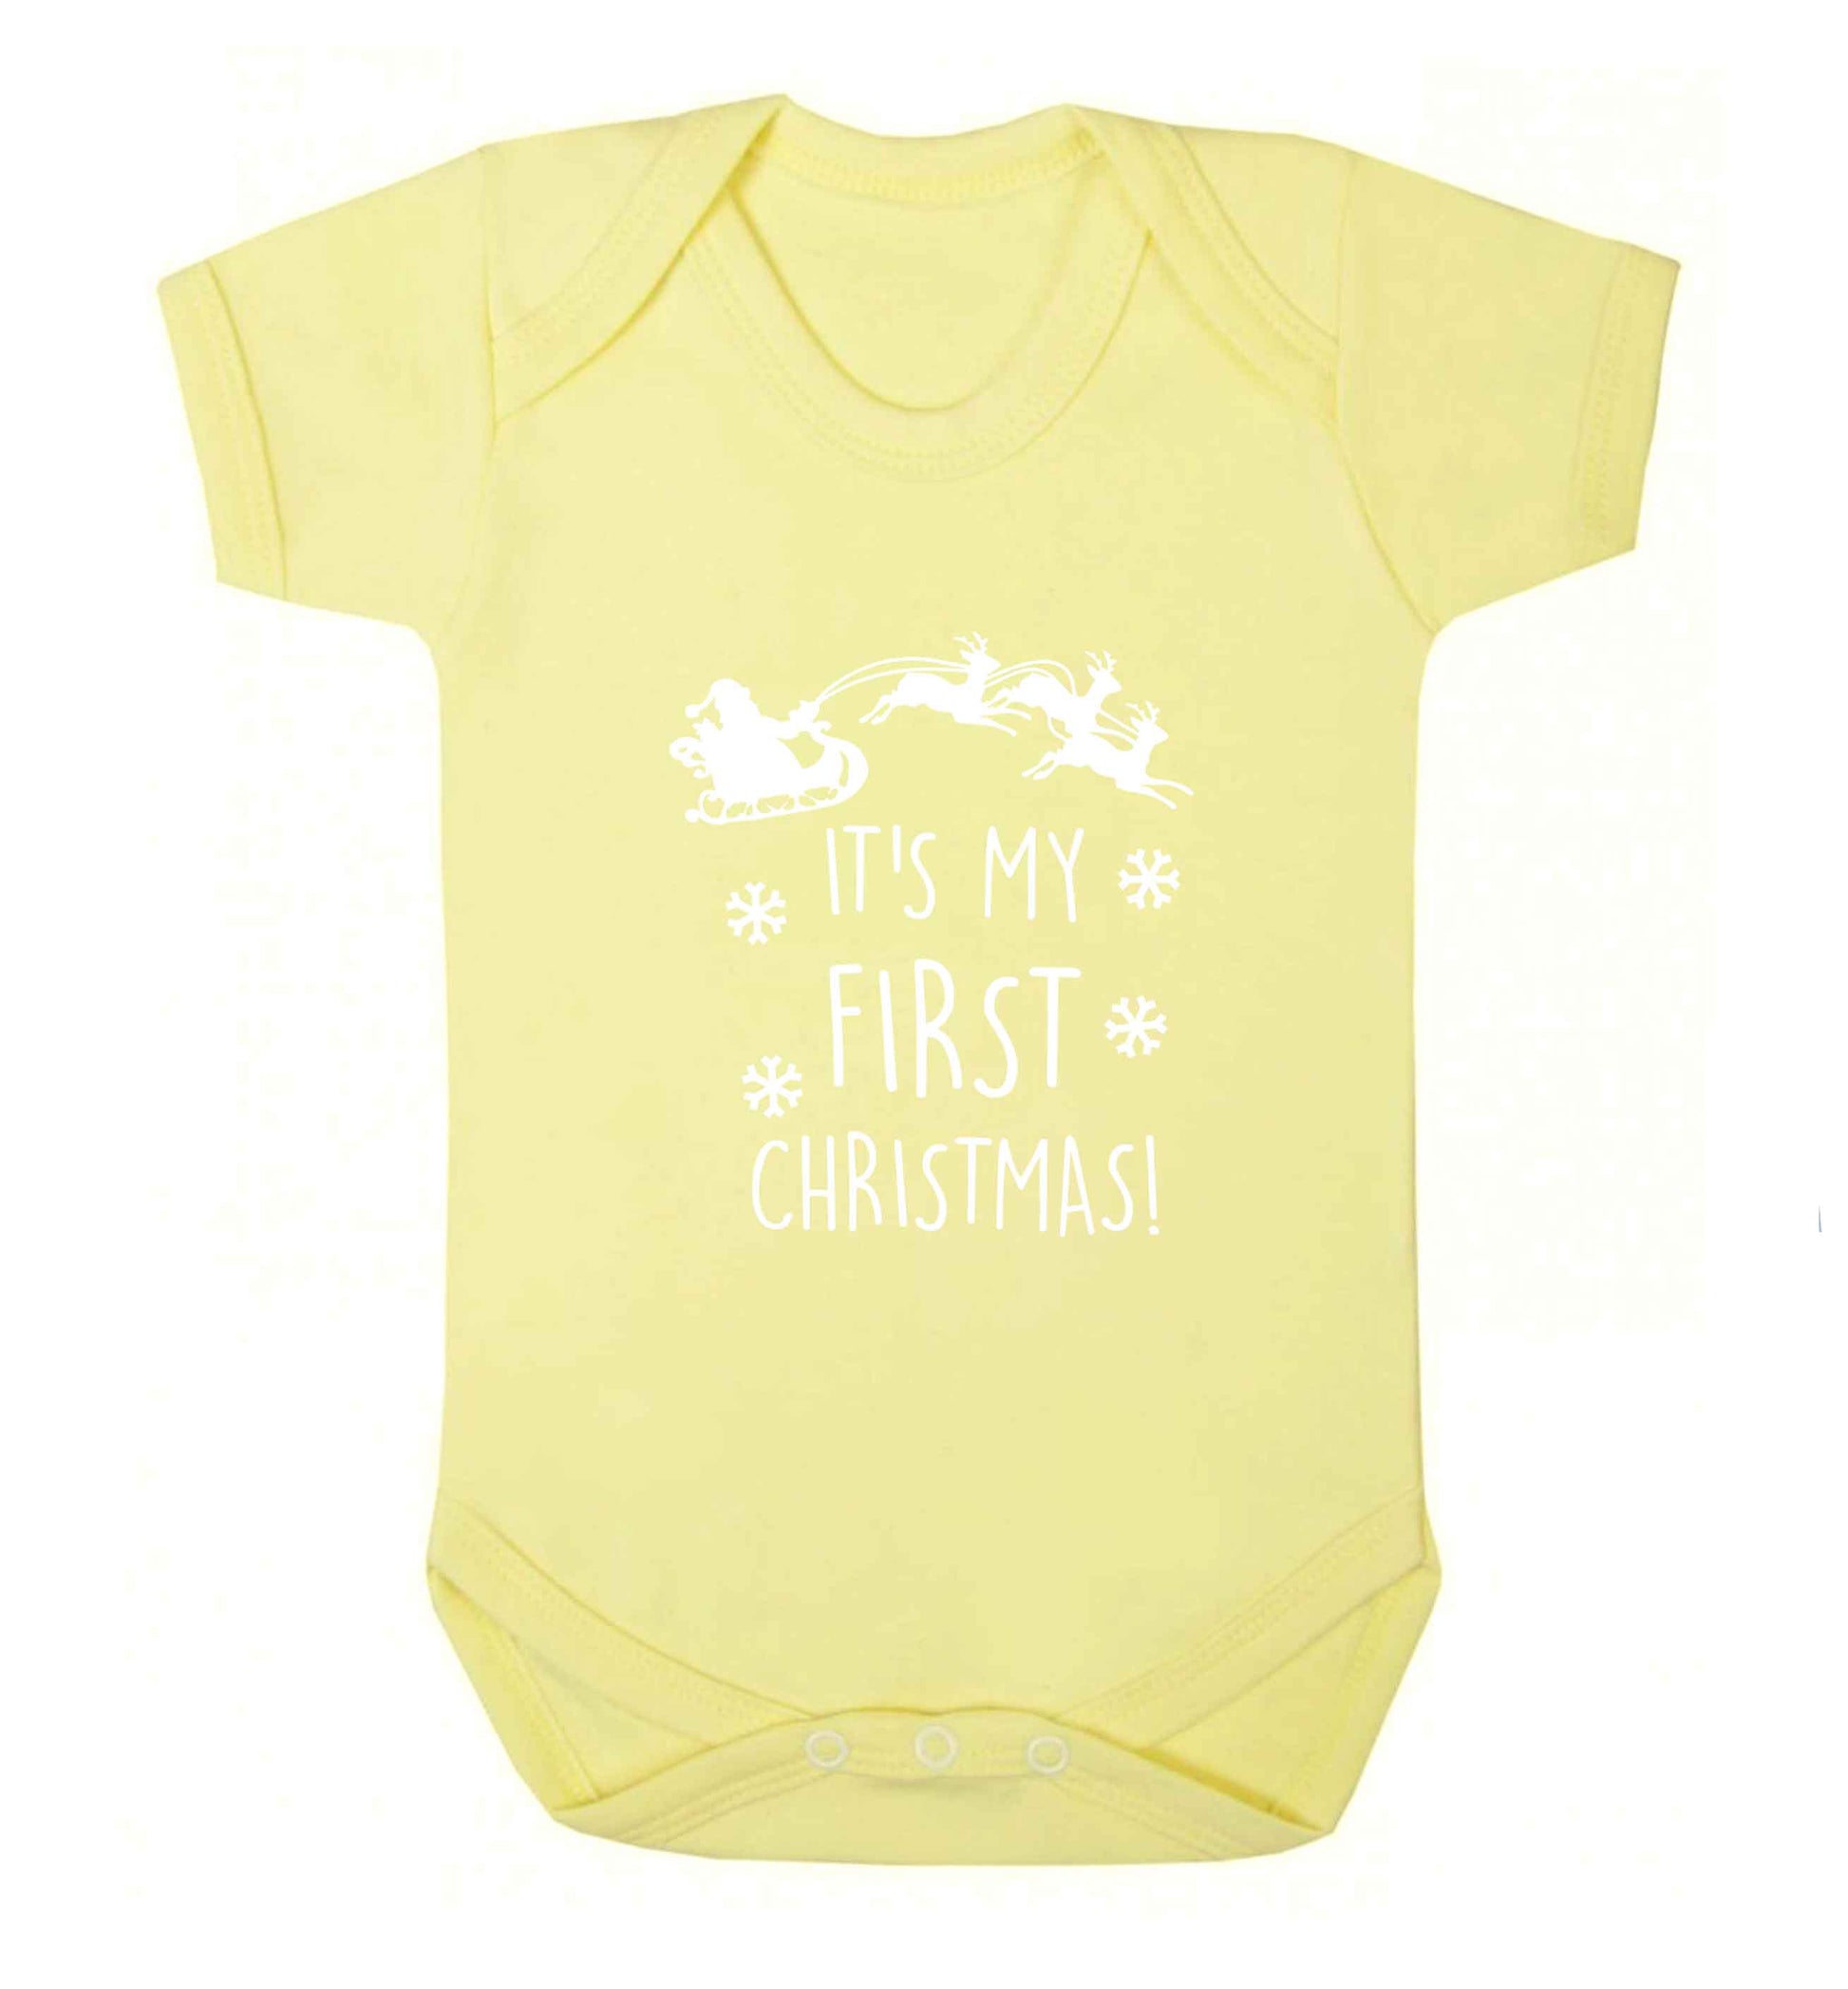 It's my first Christmas - Santa sleigh text baby vest pale yellow 18-24 months